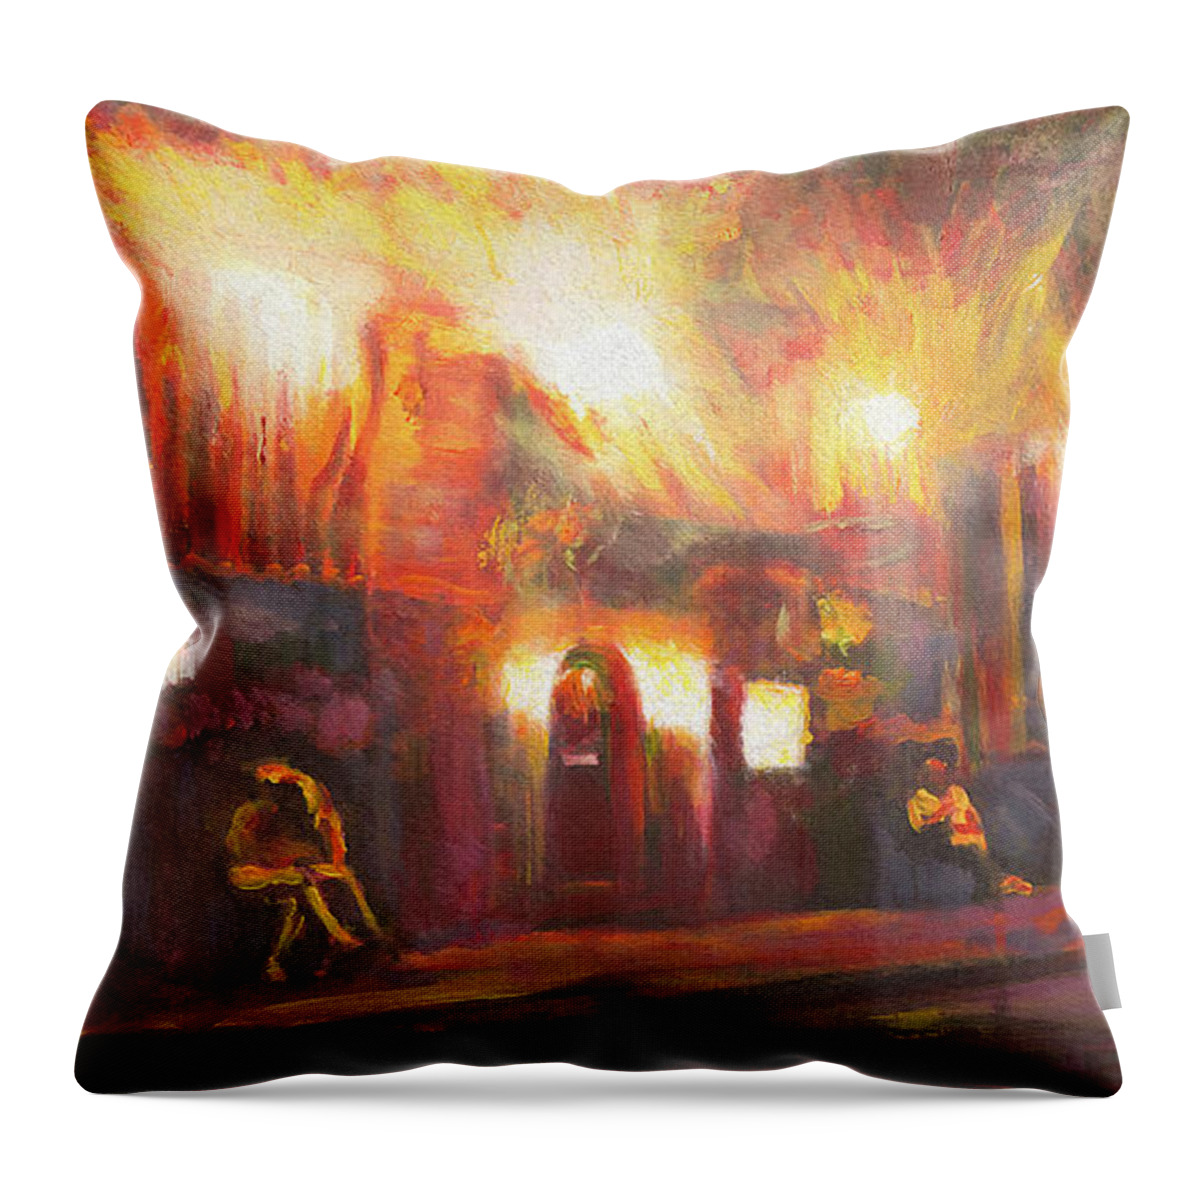 New Orleans Throw Pillow featuring the painting Irene's Cuisine - New Orleans by Francelle Theriot